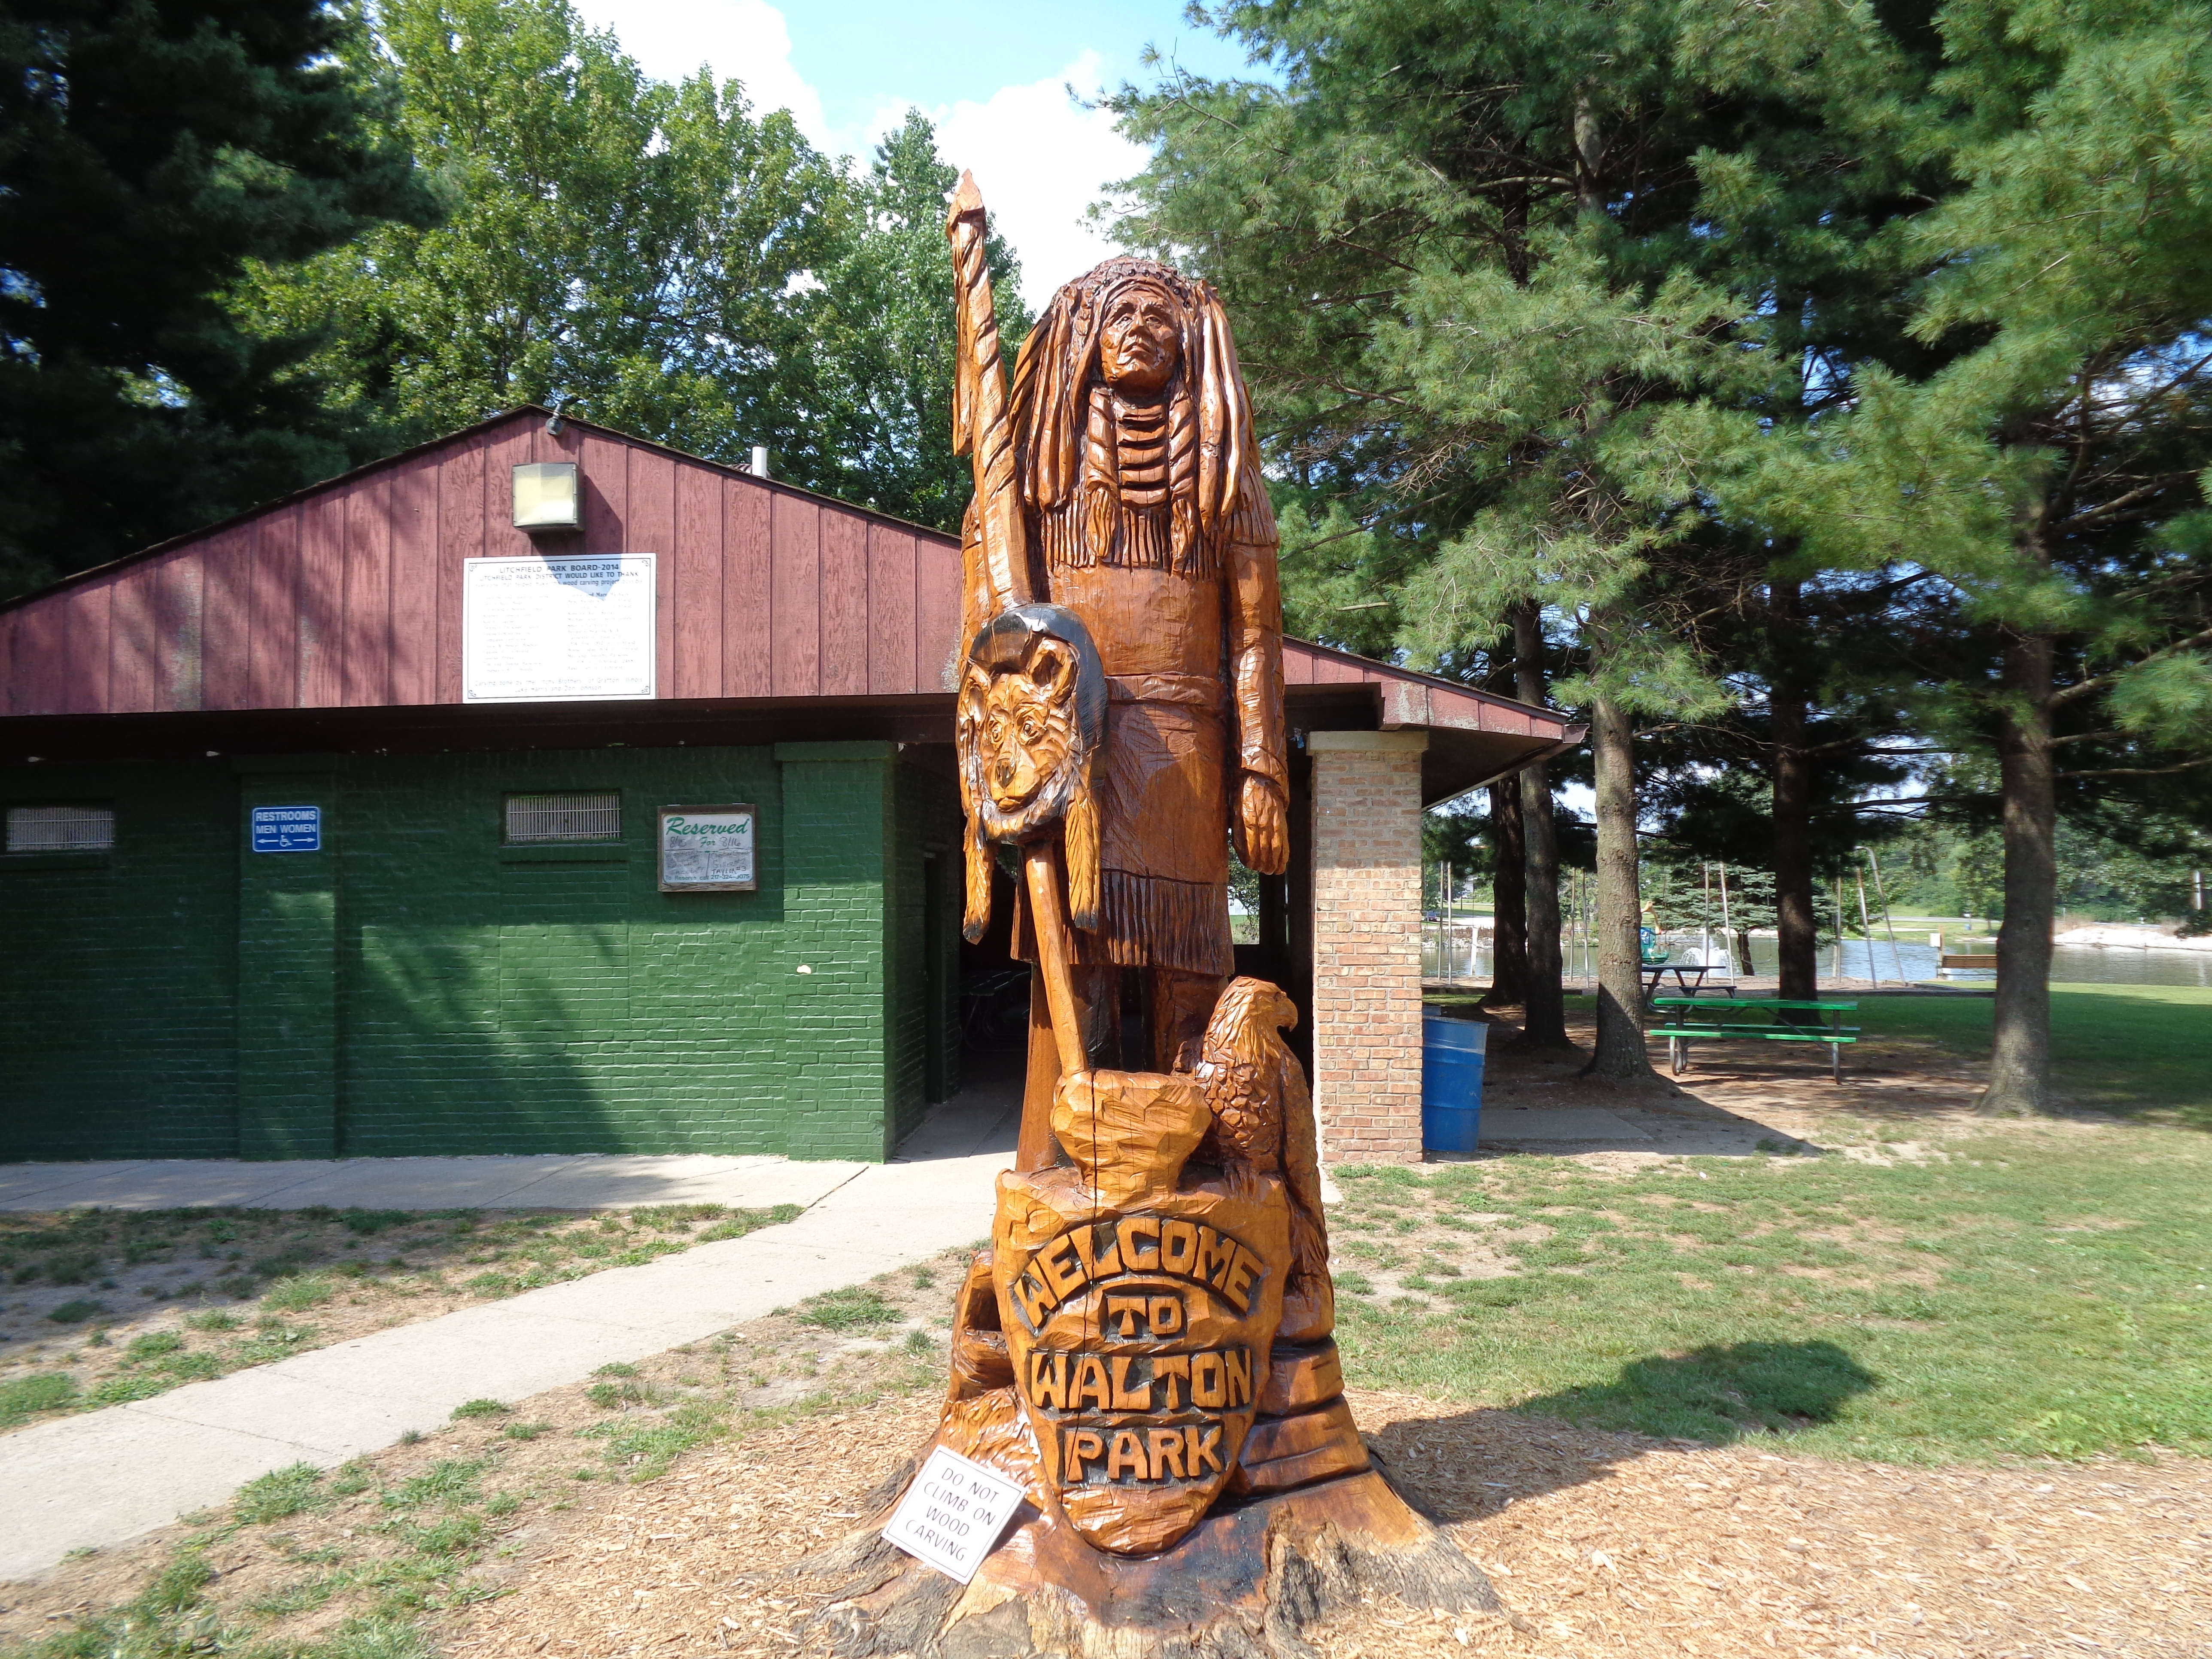 Finding the Native American sculpture at Walton Park is one of the top 10 things to do in Litchfield.